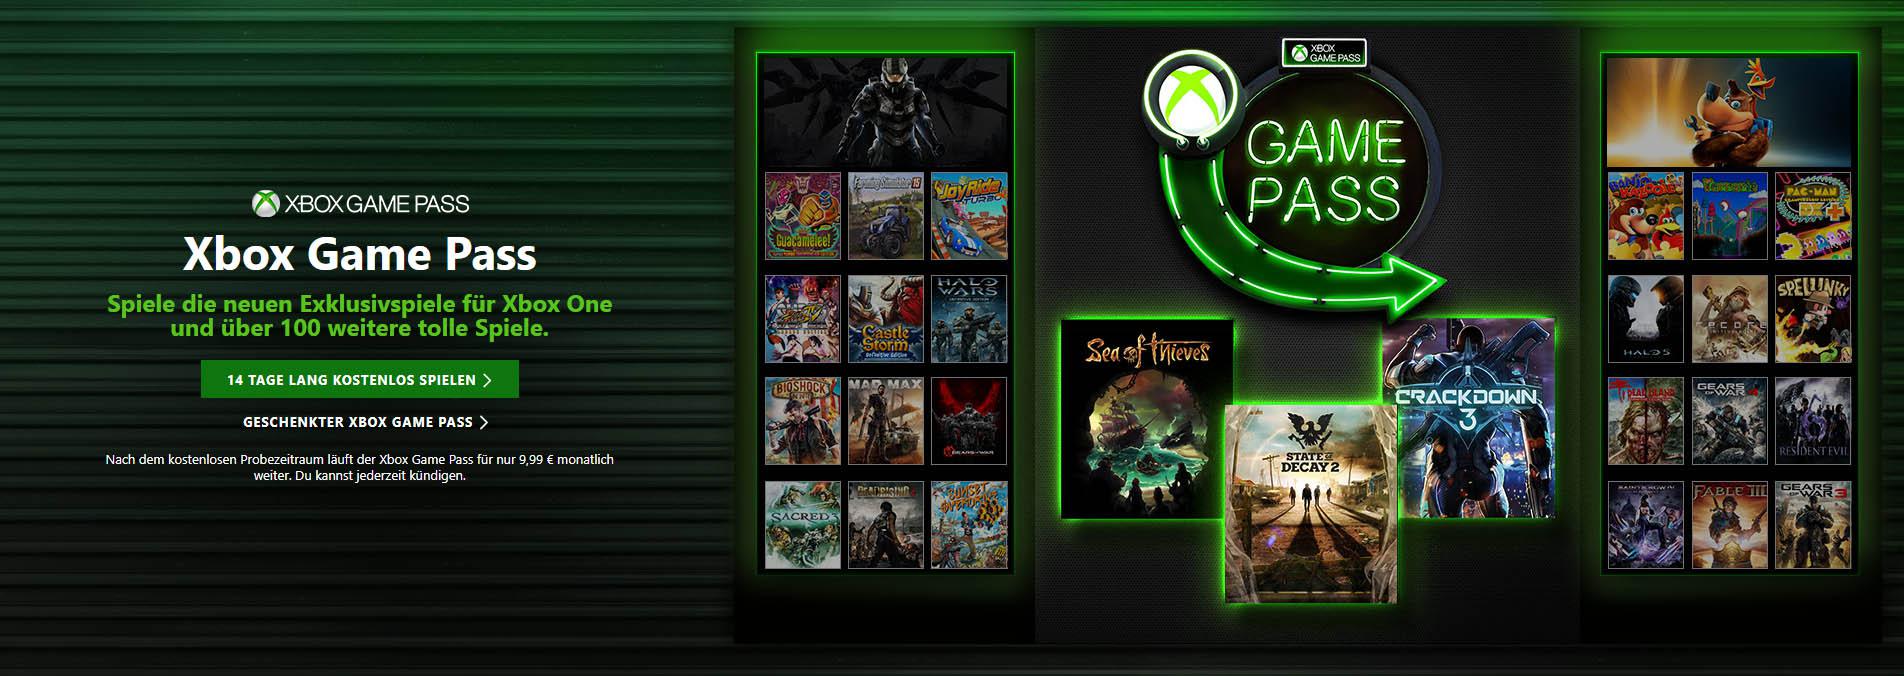 does xbox game pass work on xbox 360